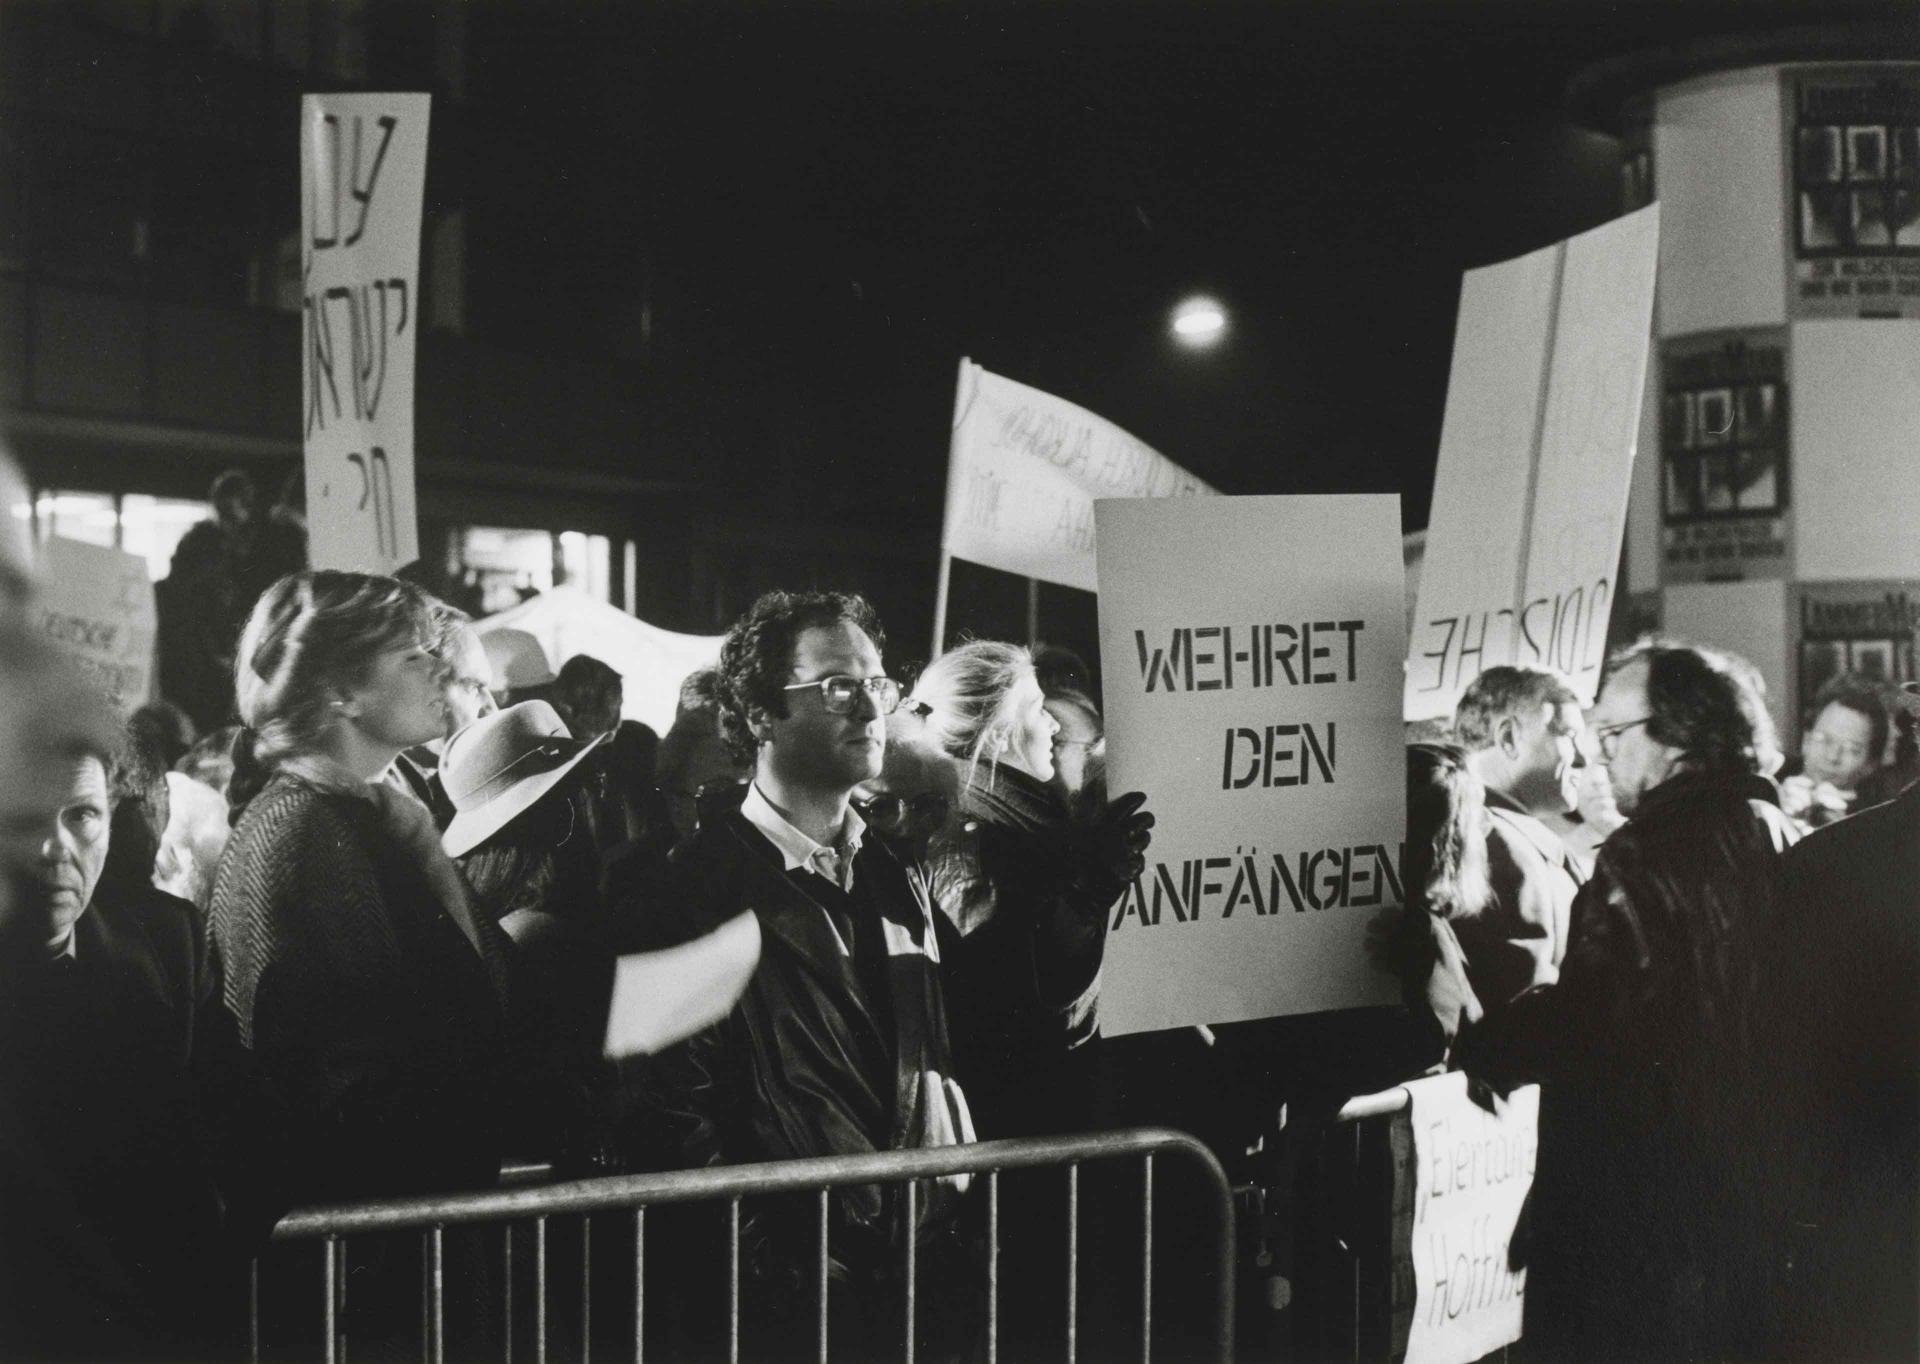 Black-and-white photograph of protesters with placards bearing slogans such as "Resist the beginnings".